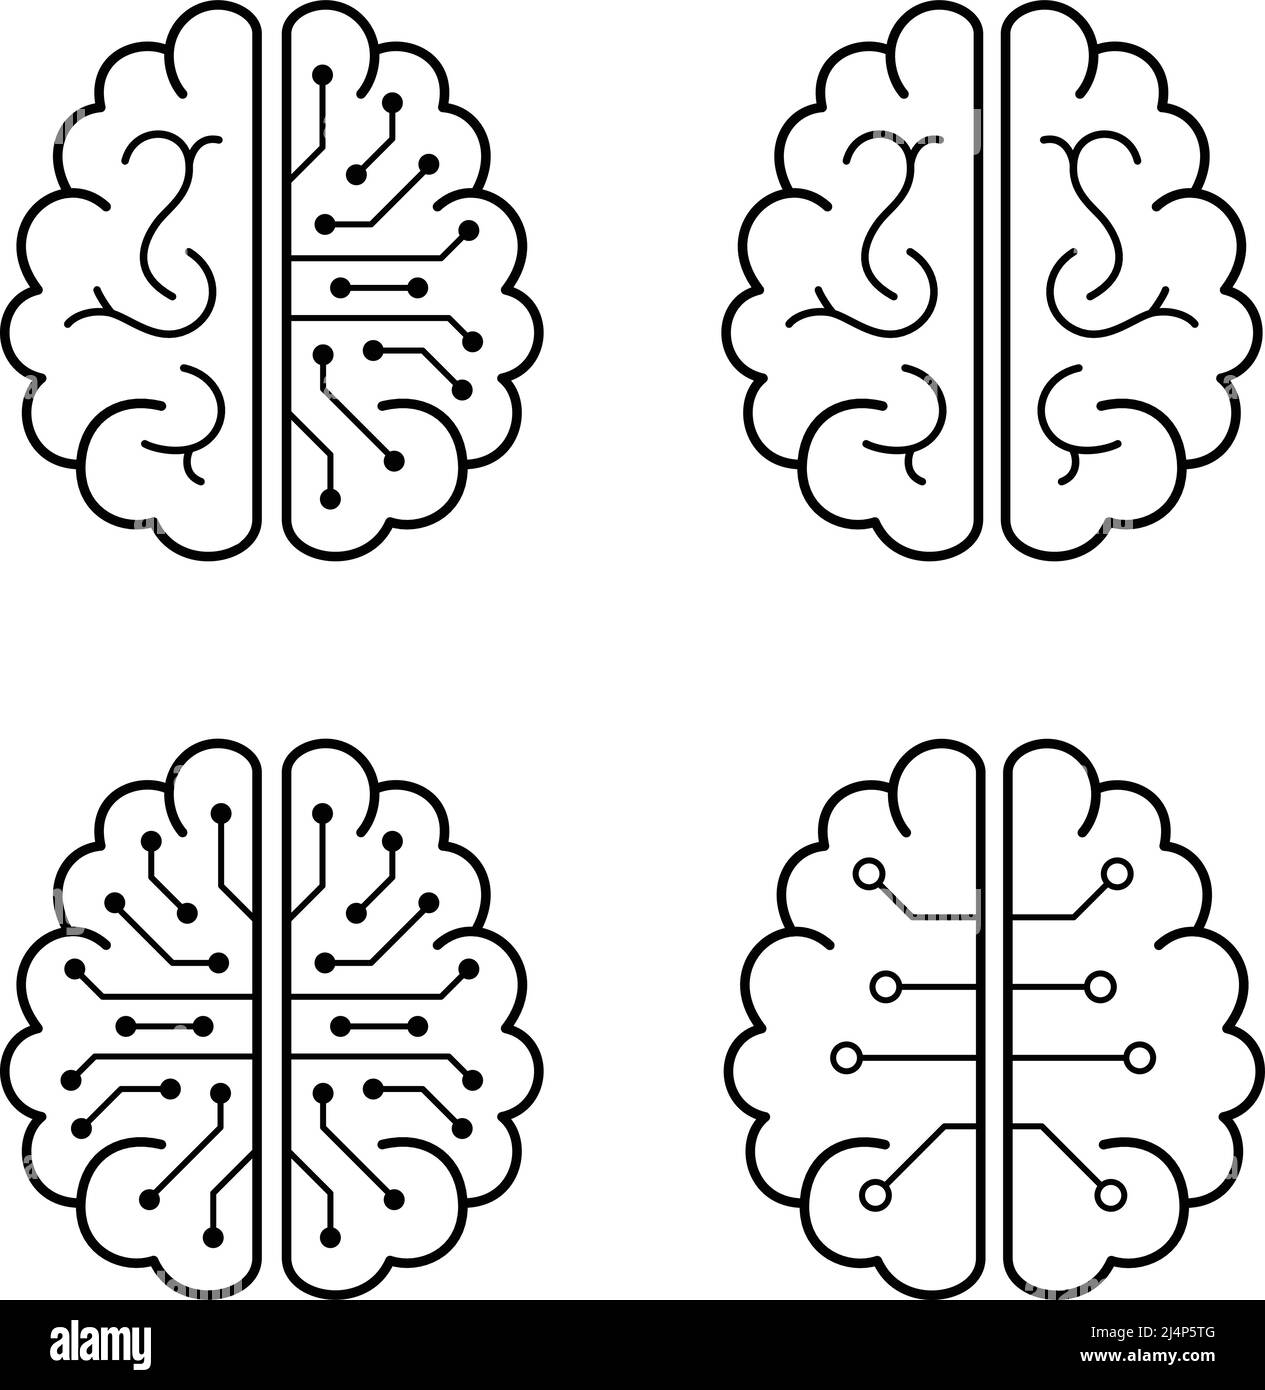 Human brain and artificial intelligence concept, top view Stock Vector